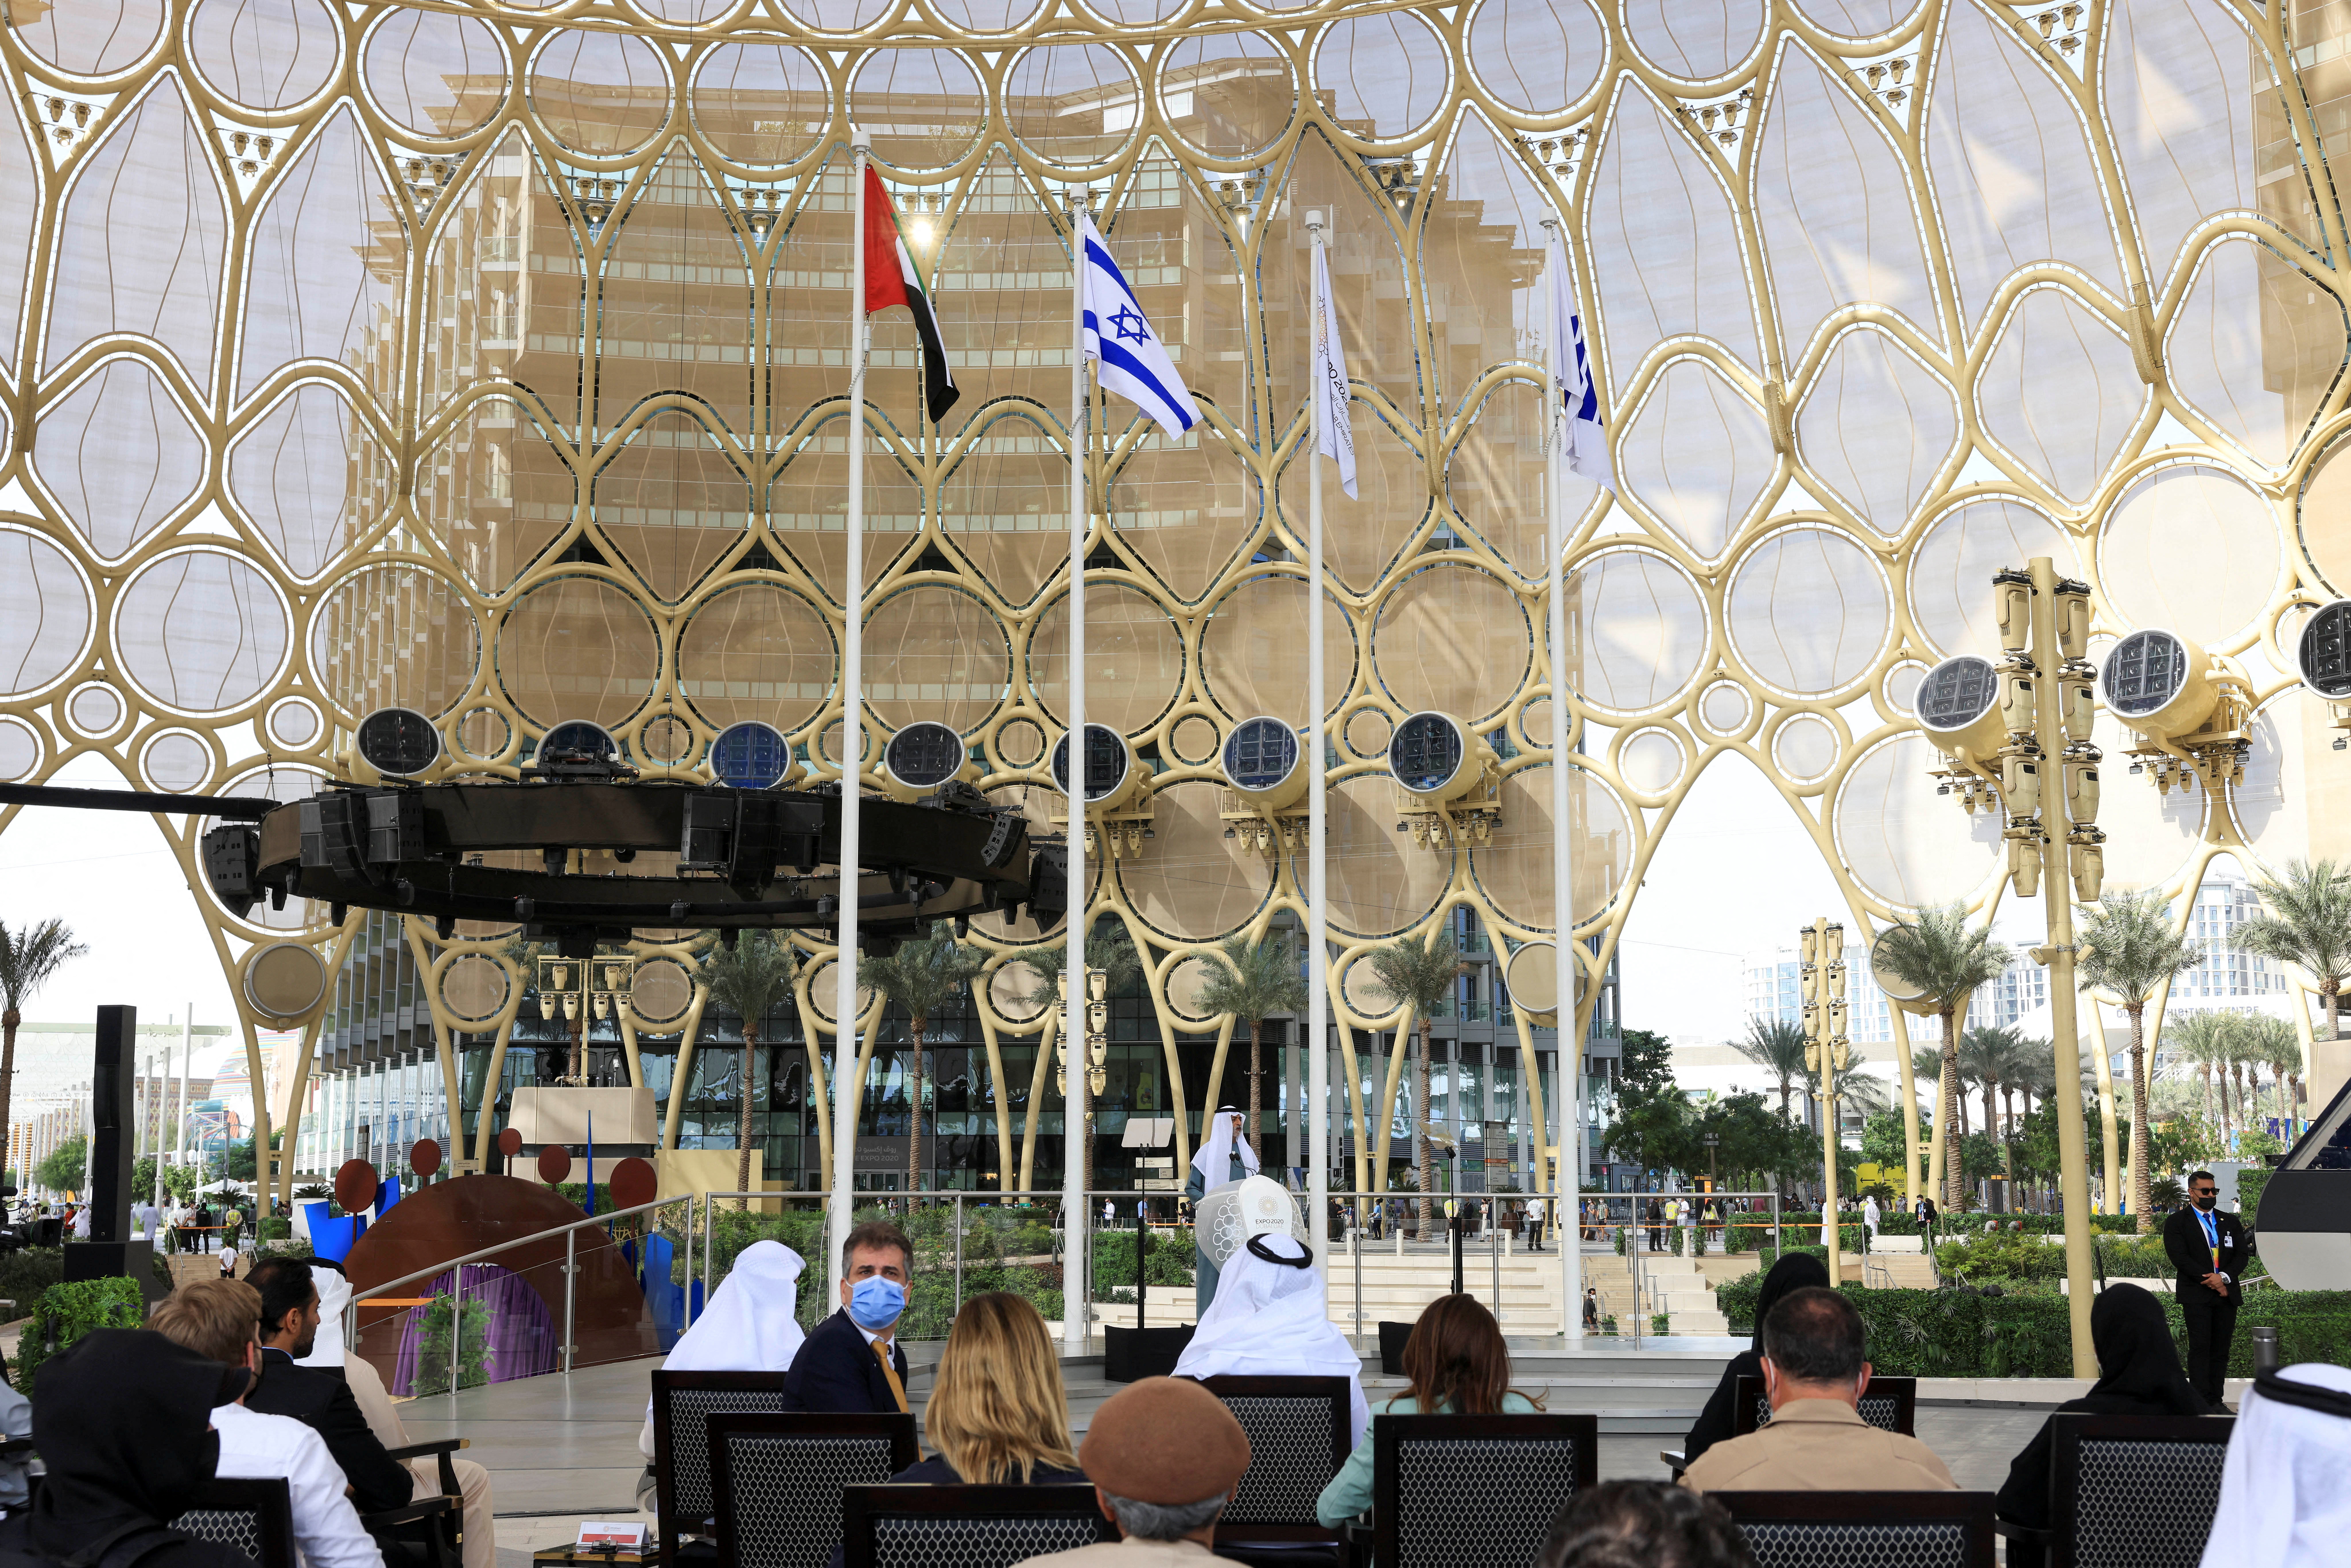 Sheikh Nahyan Mubarak Al Nahyan, UAE Minister of Tolerance and Coexistence speaks during Israel's National Day ceremony at Expo 2020 Dubai, in Dubai